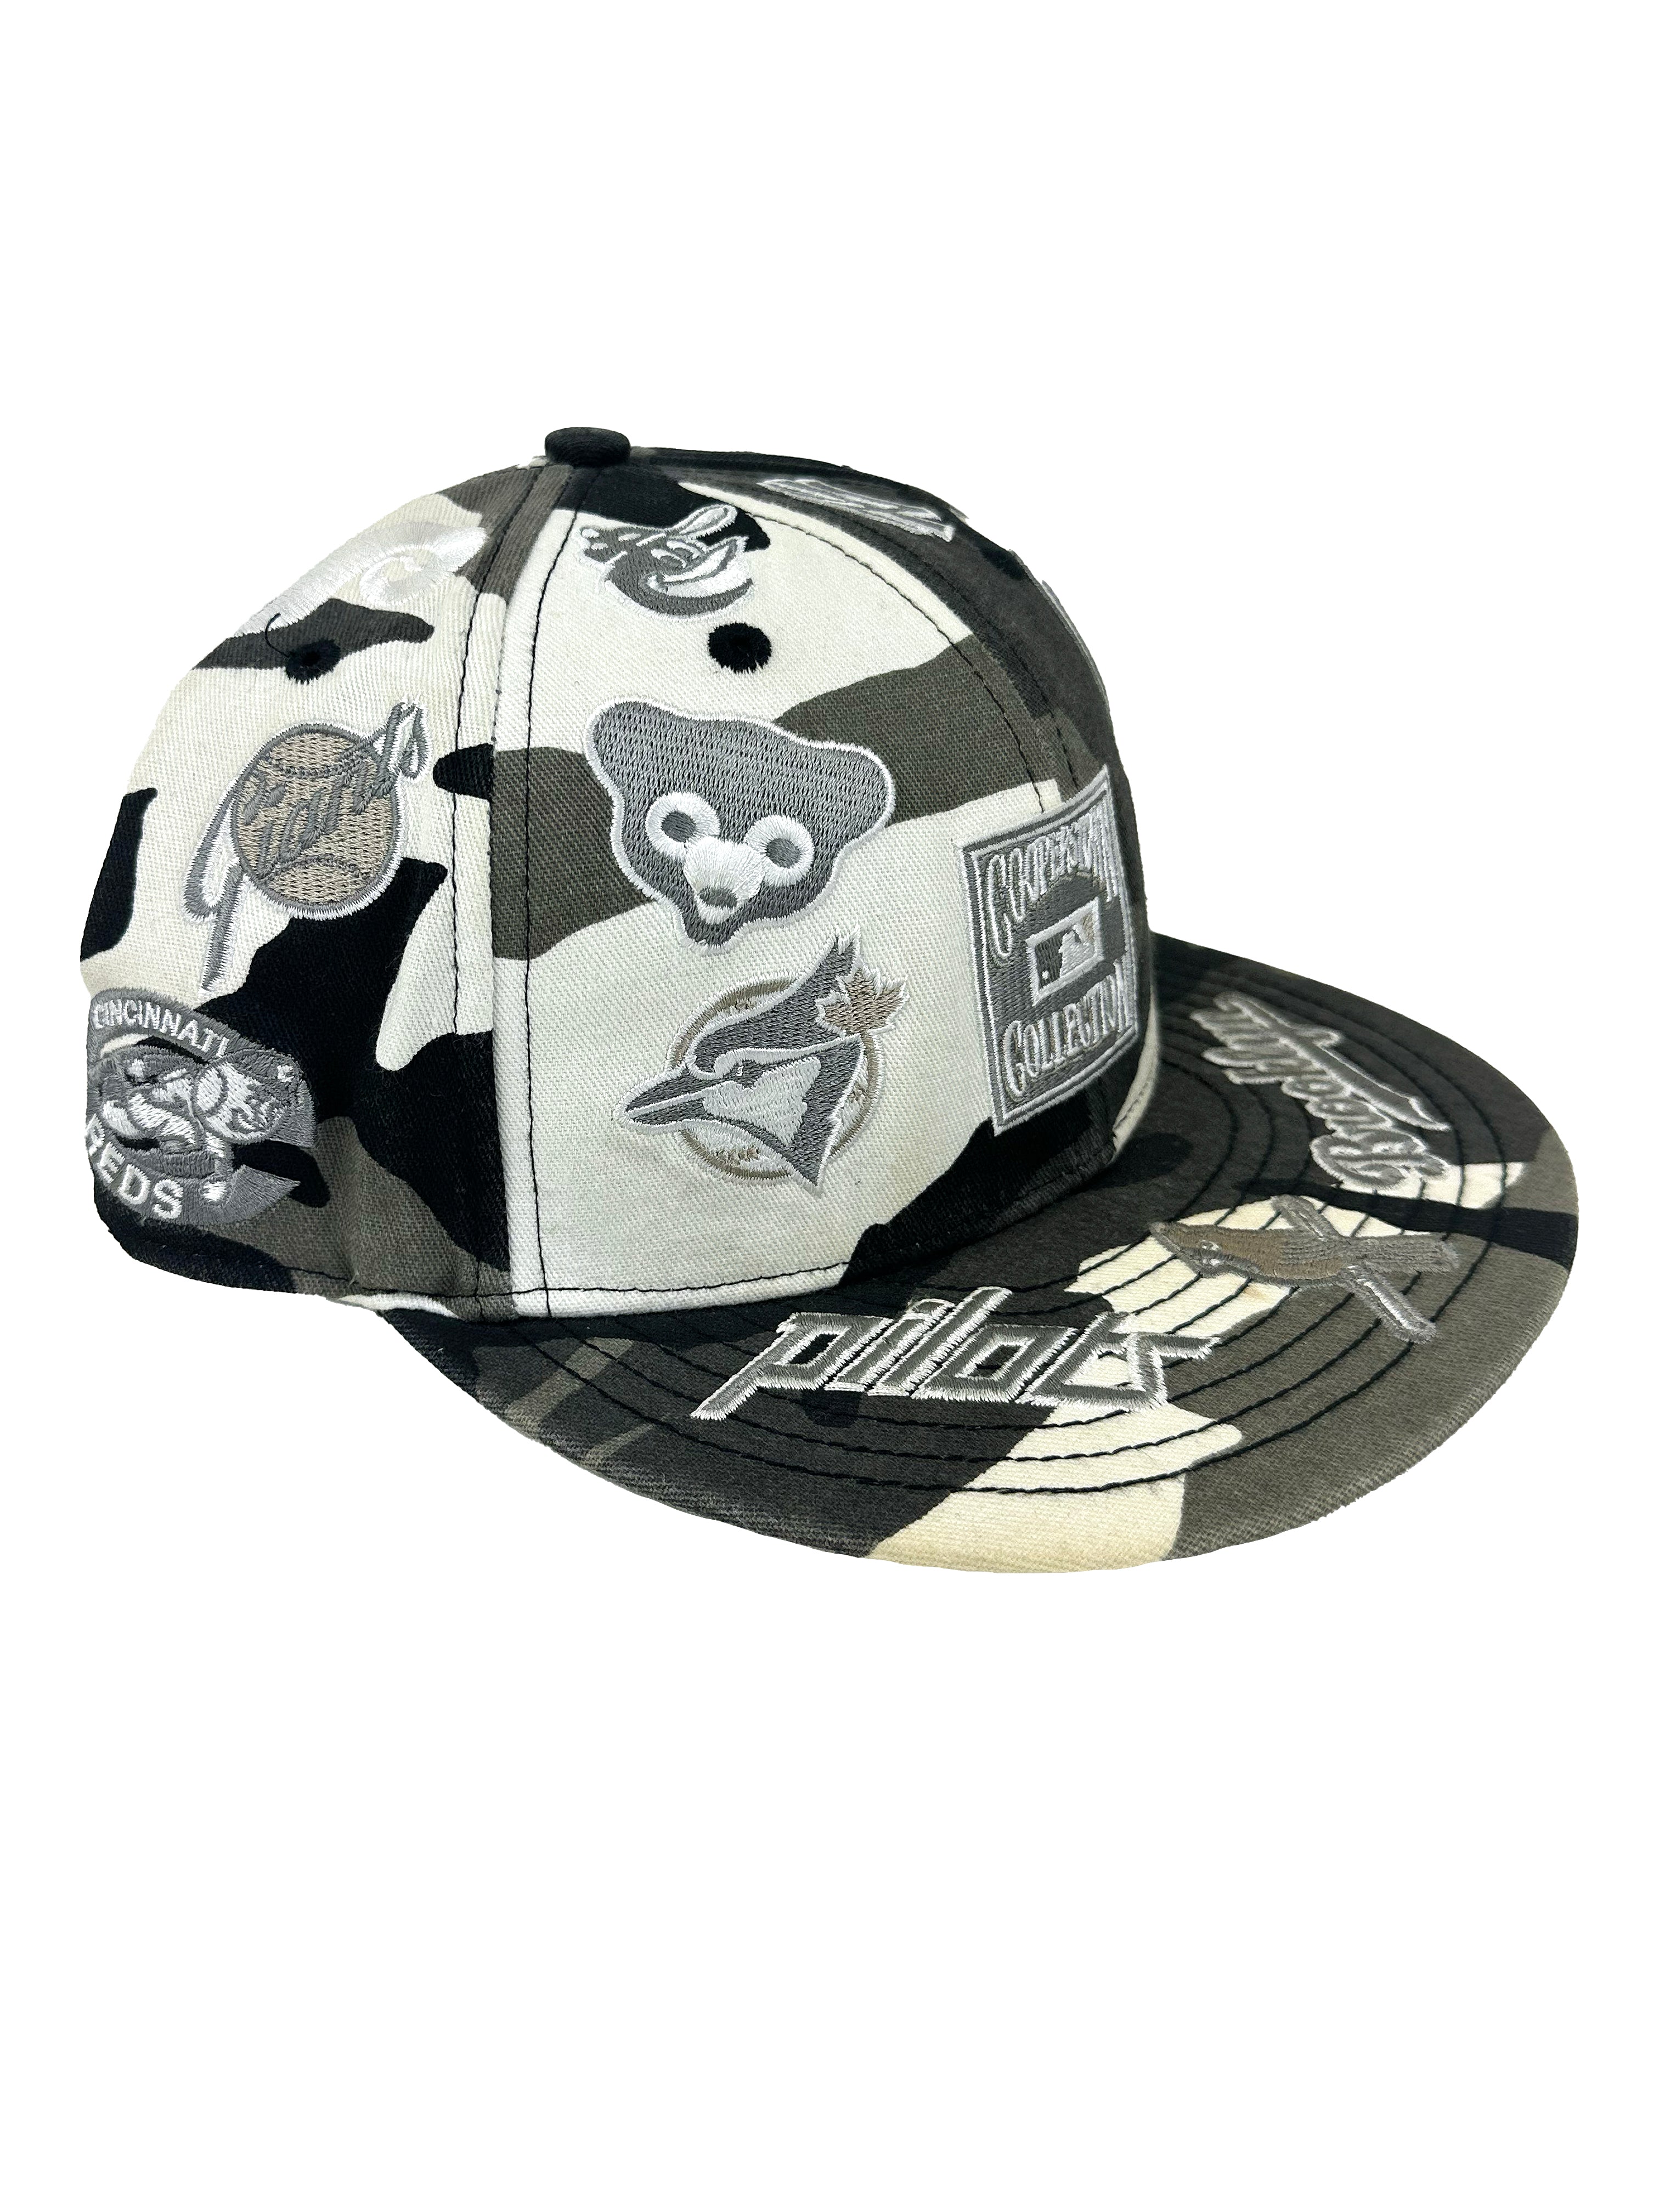 New Era Cooperstown Collection Patch Hat 00's